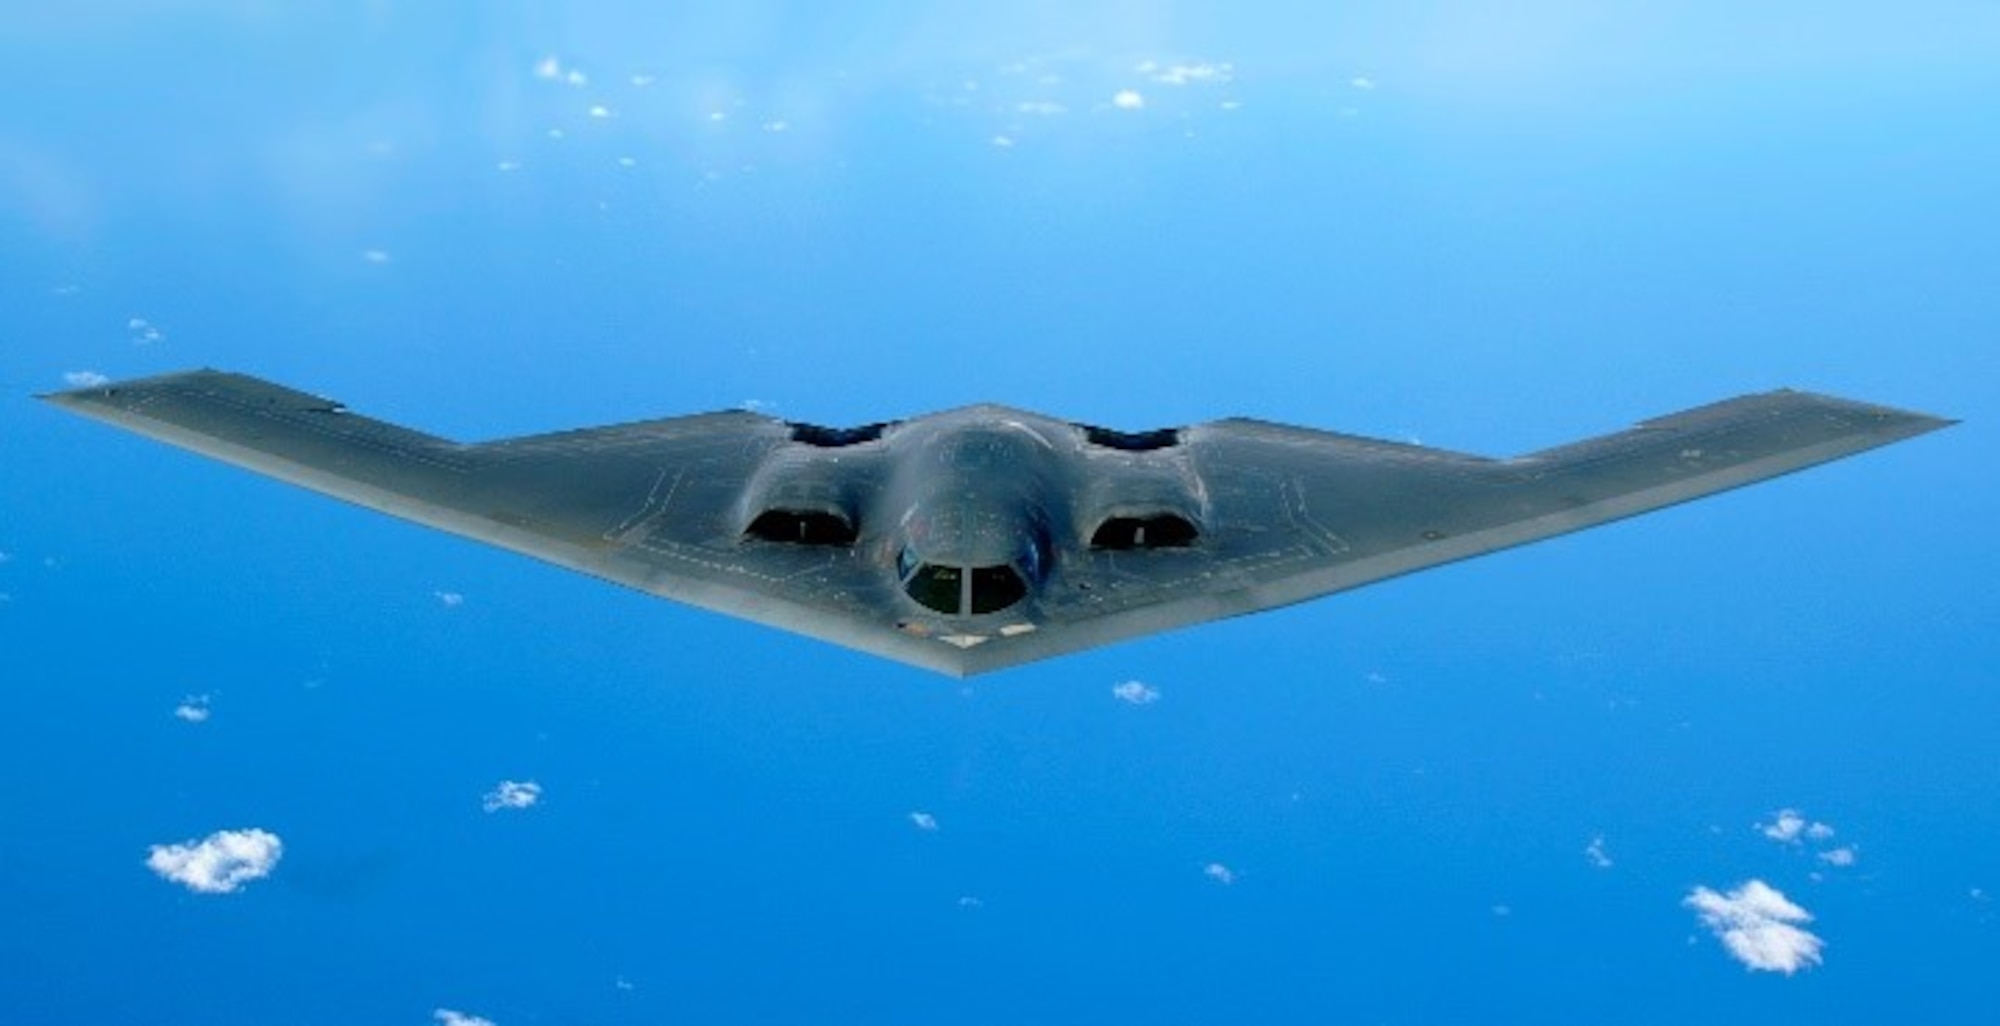 Pictured is the B-2 Stealth Bomber. Five of Gowadia’s criminal convictions were related to his design (for the People’s Republic of China) of a low-signature cruise missile exhaust system capable of rendering a missile resistant to detection. He was paid approximately $2 million for his work on the cruise missile and for secret information he disclosed on the B-2 propulsion systems. He was also convicted of three counts of illegally communicating classified information regarding lock-on range for infrared missiles against the B-2. (U.S. Air Force photo)